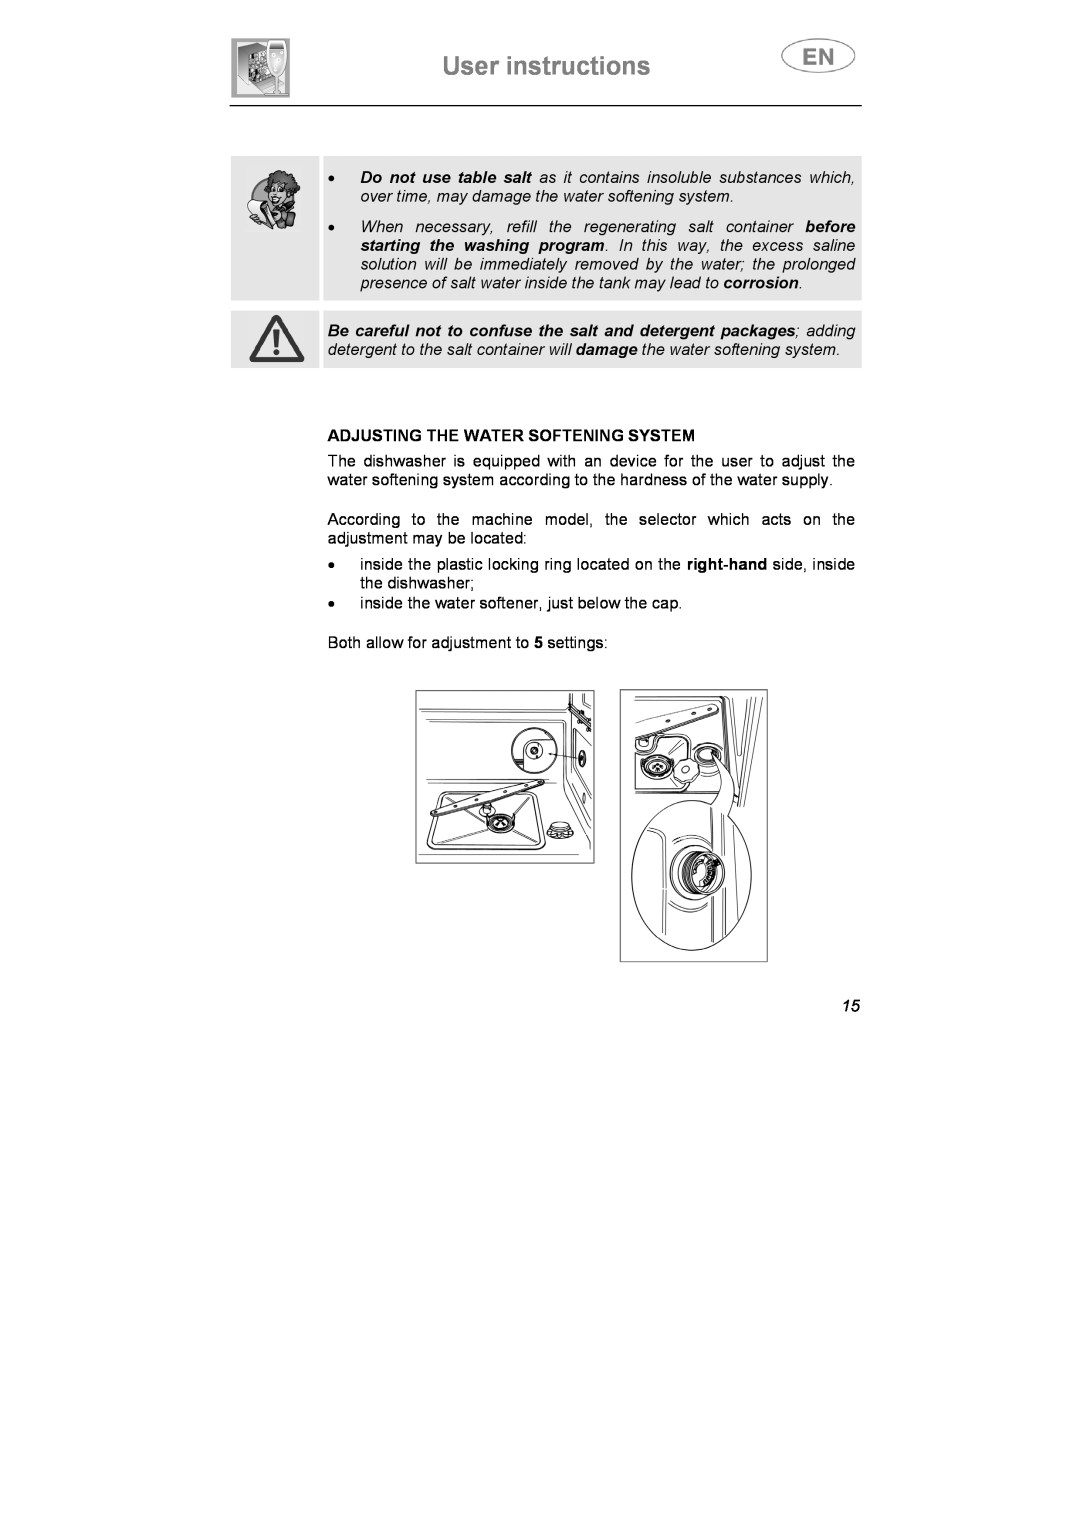 Smeg CA01-4, CA01-5, CA01S manual User instructions, Adjusting The Water Softening System 